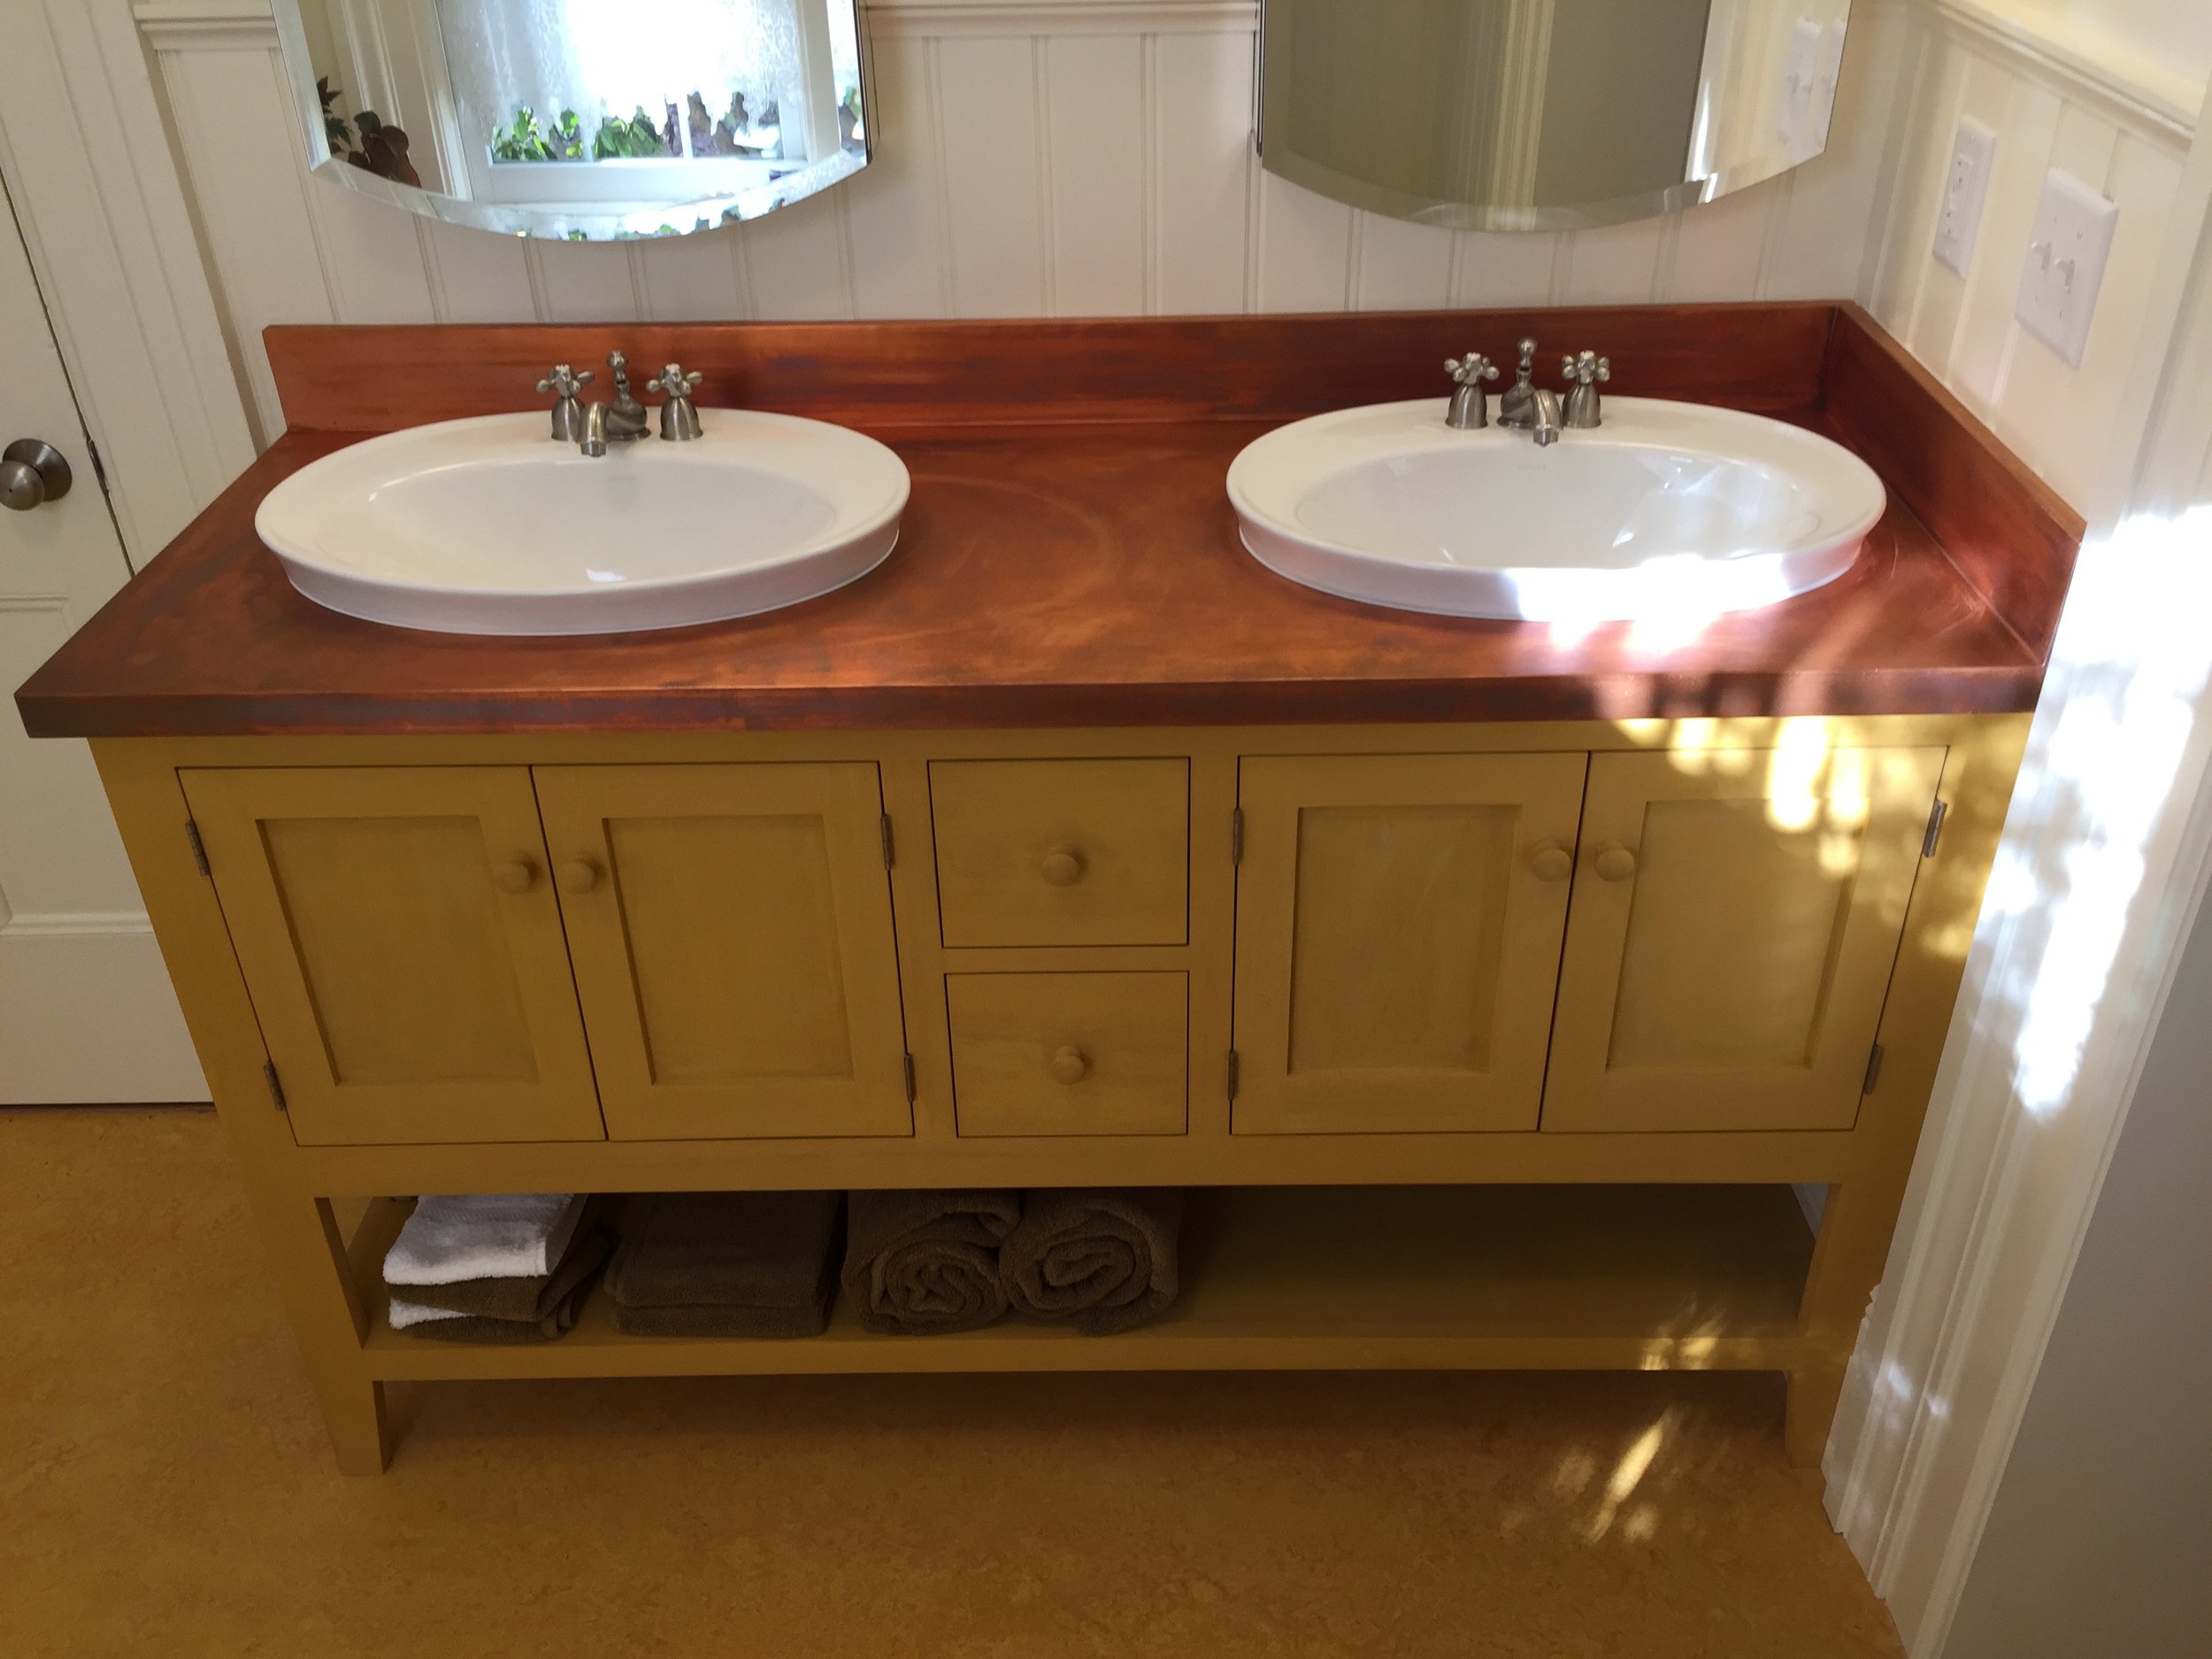  JFB designed and built this custom vanity with copper countertop. The homeowners chose a bold mustard milk paint to give an original touch to the room. 